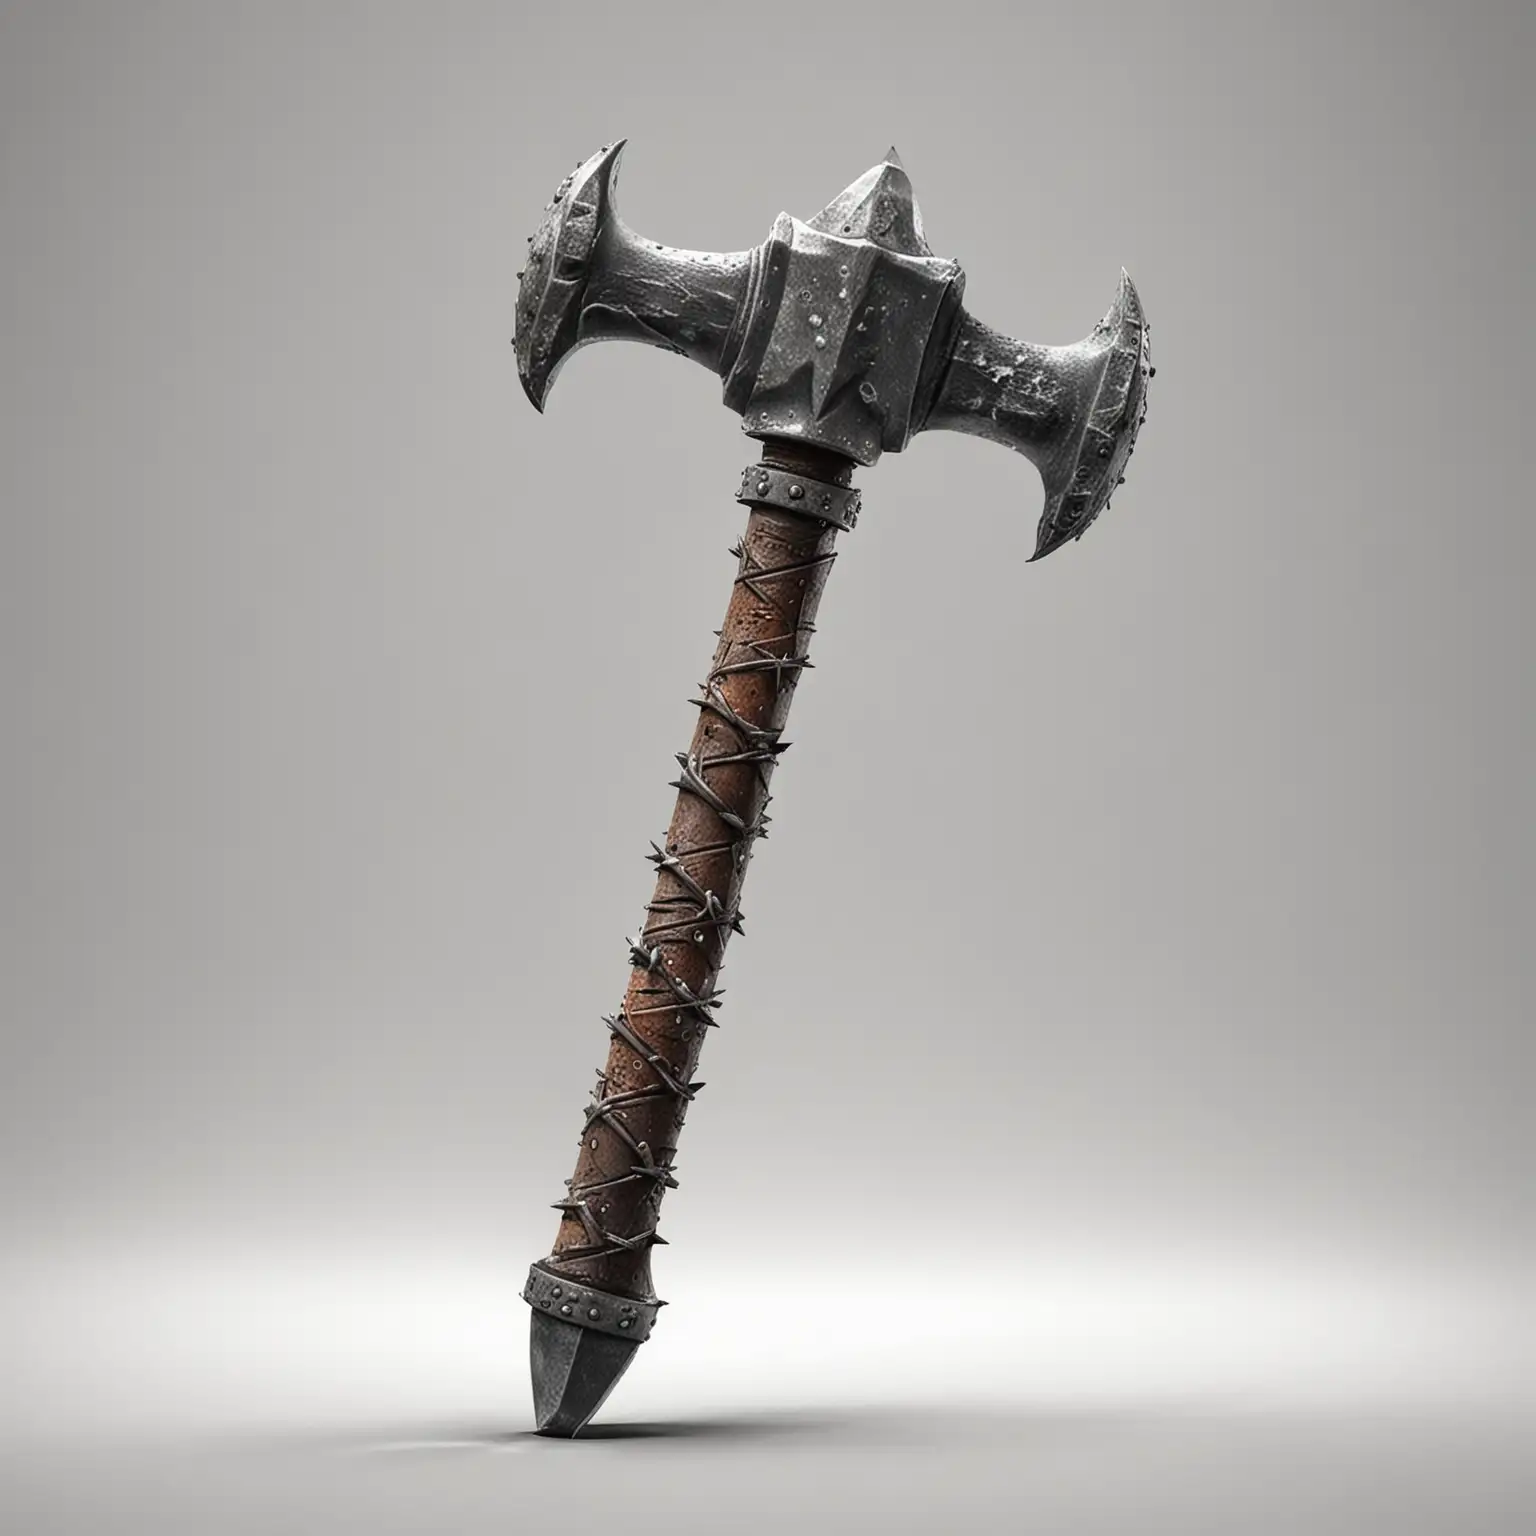 Fantasy-Heros-Steel-Hammer-with-Spikes-on-White-Background